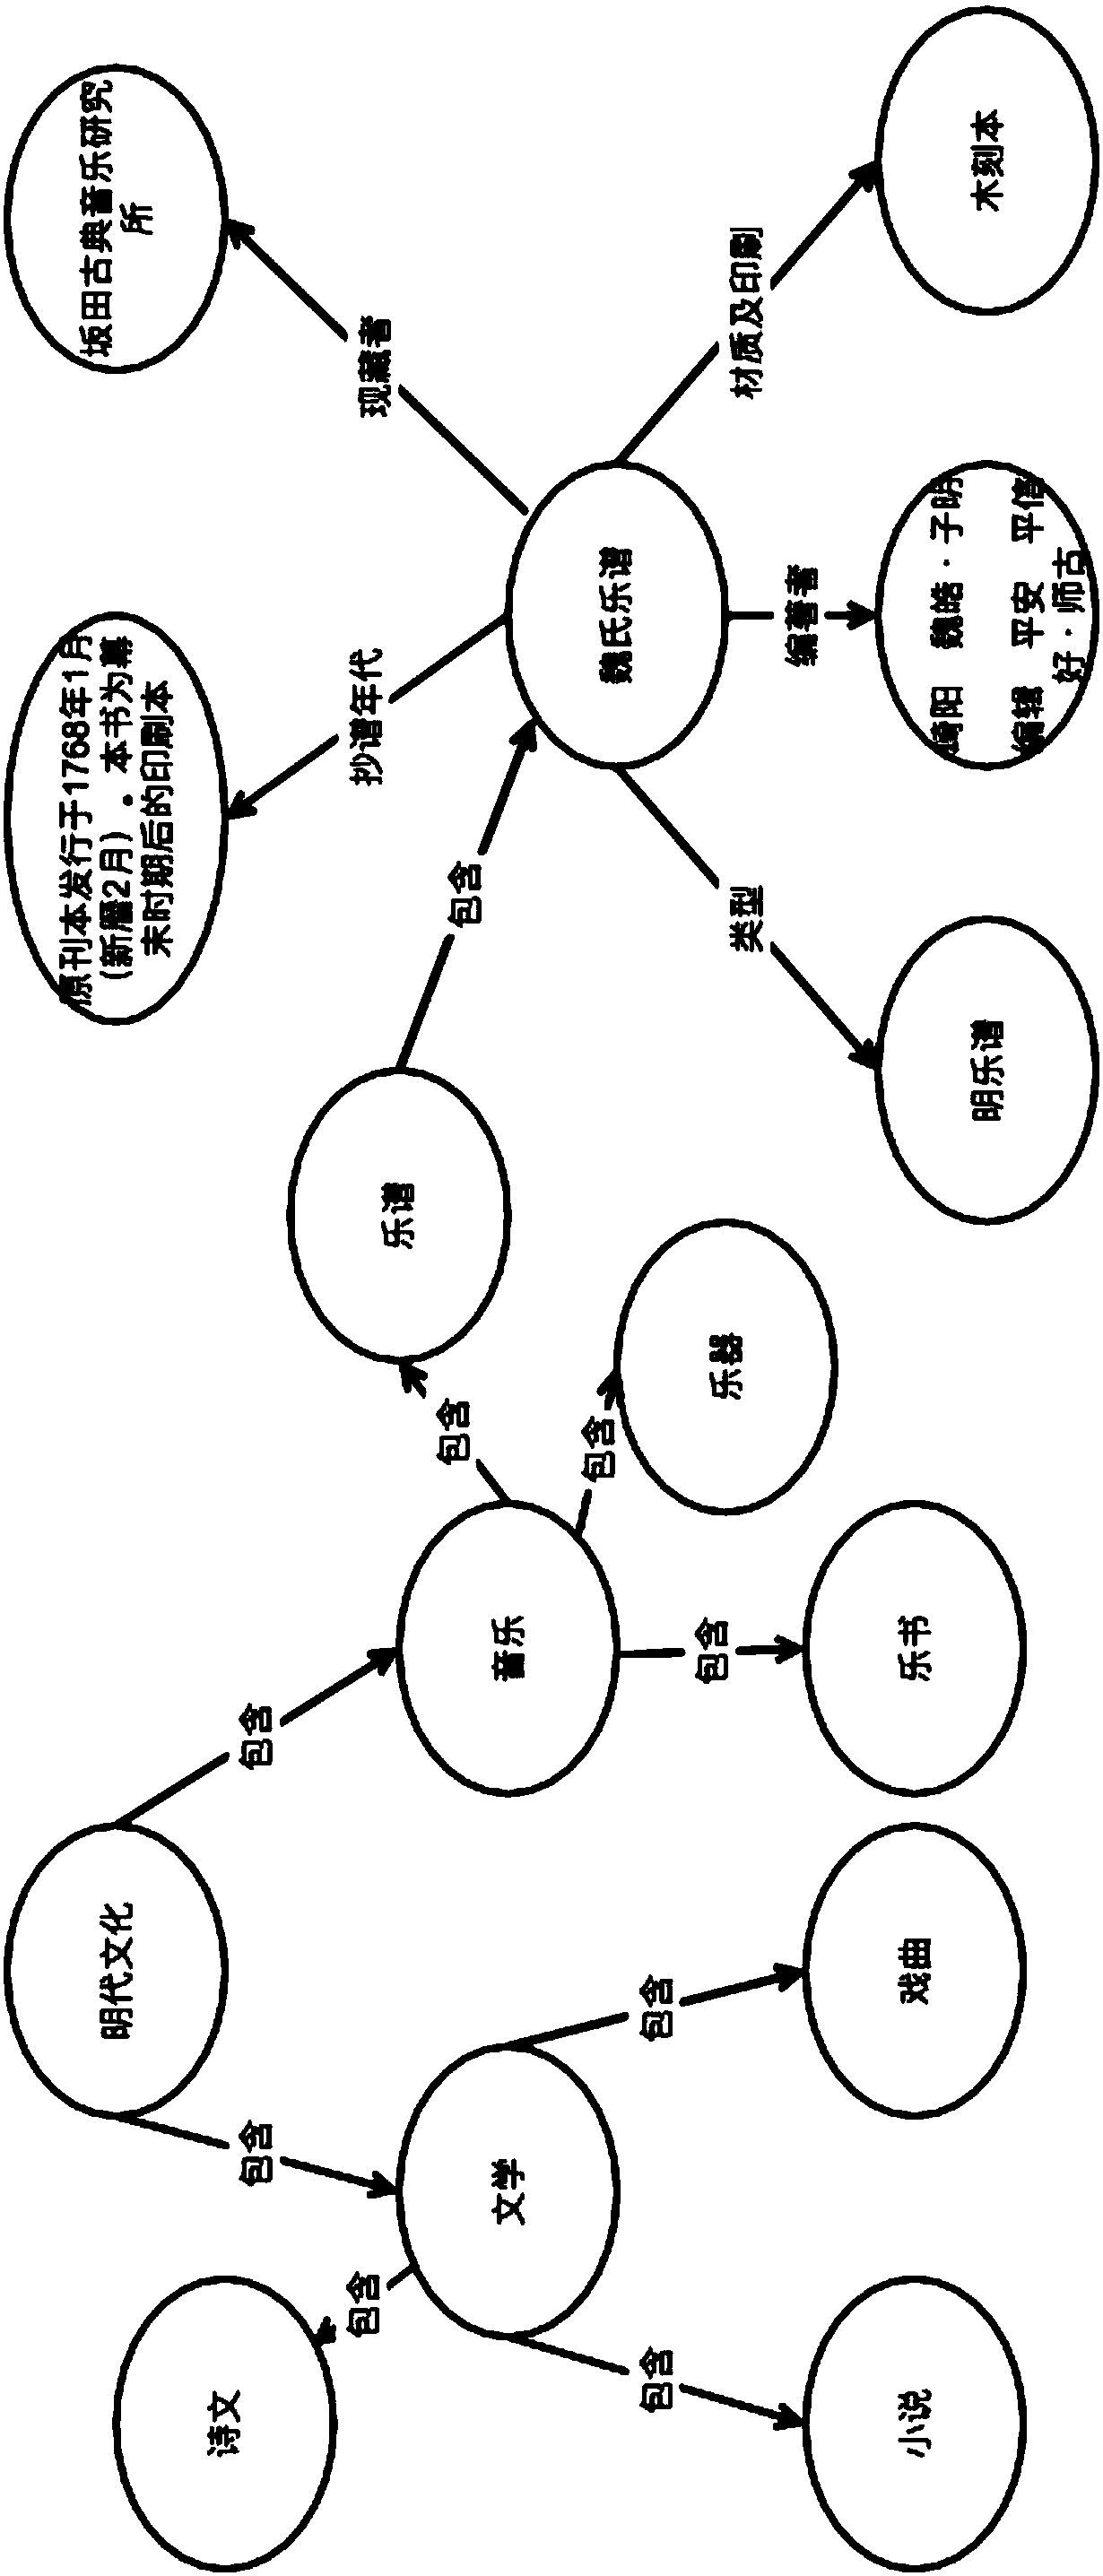 Natural-language-processing method of ancient-tablature and ancient-culture knowledge graph